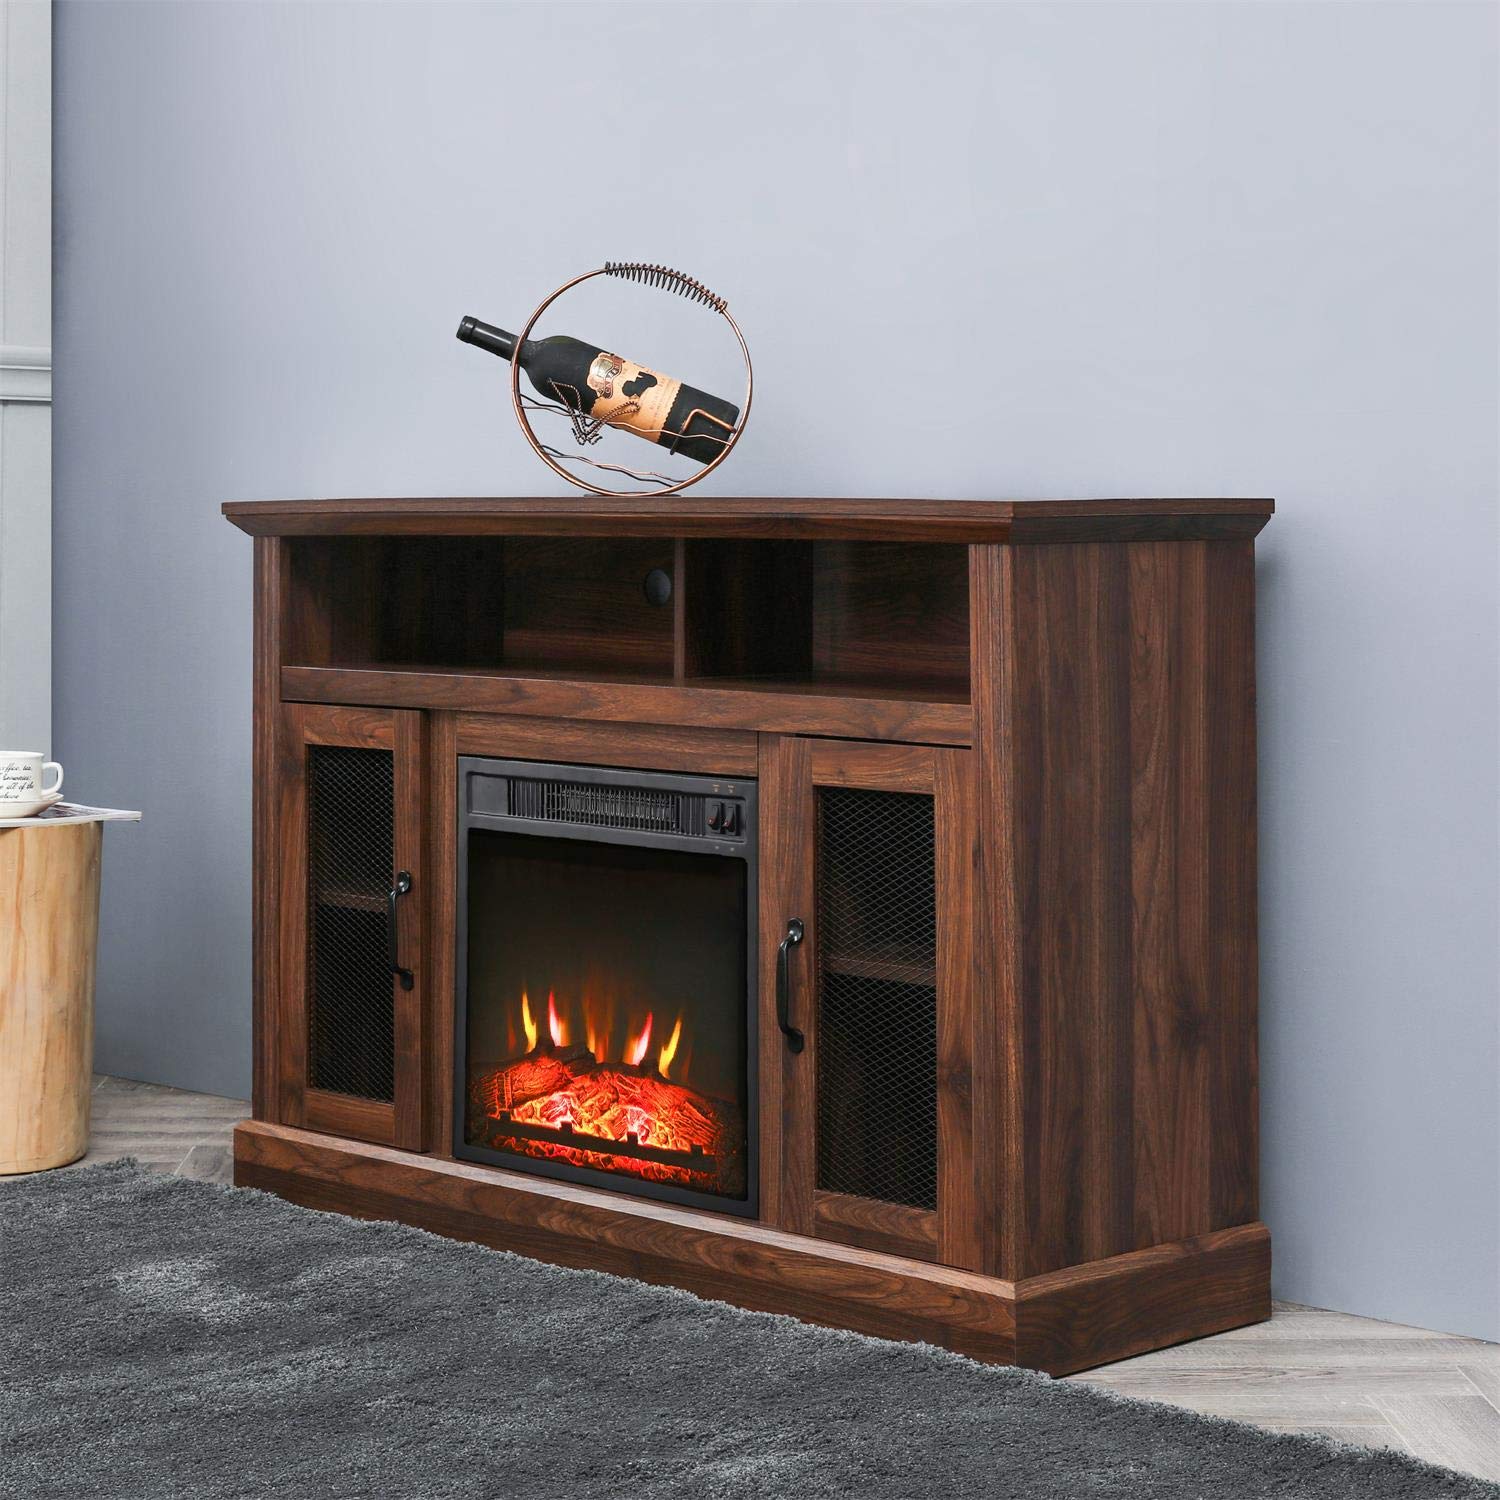 Patio Festival Fireplace Entertainment Center Wooden Electric Fireplaces Tv Stand Fire Place For Tvs Up To 50" Wide, Espresso